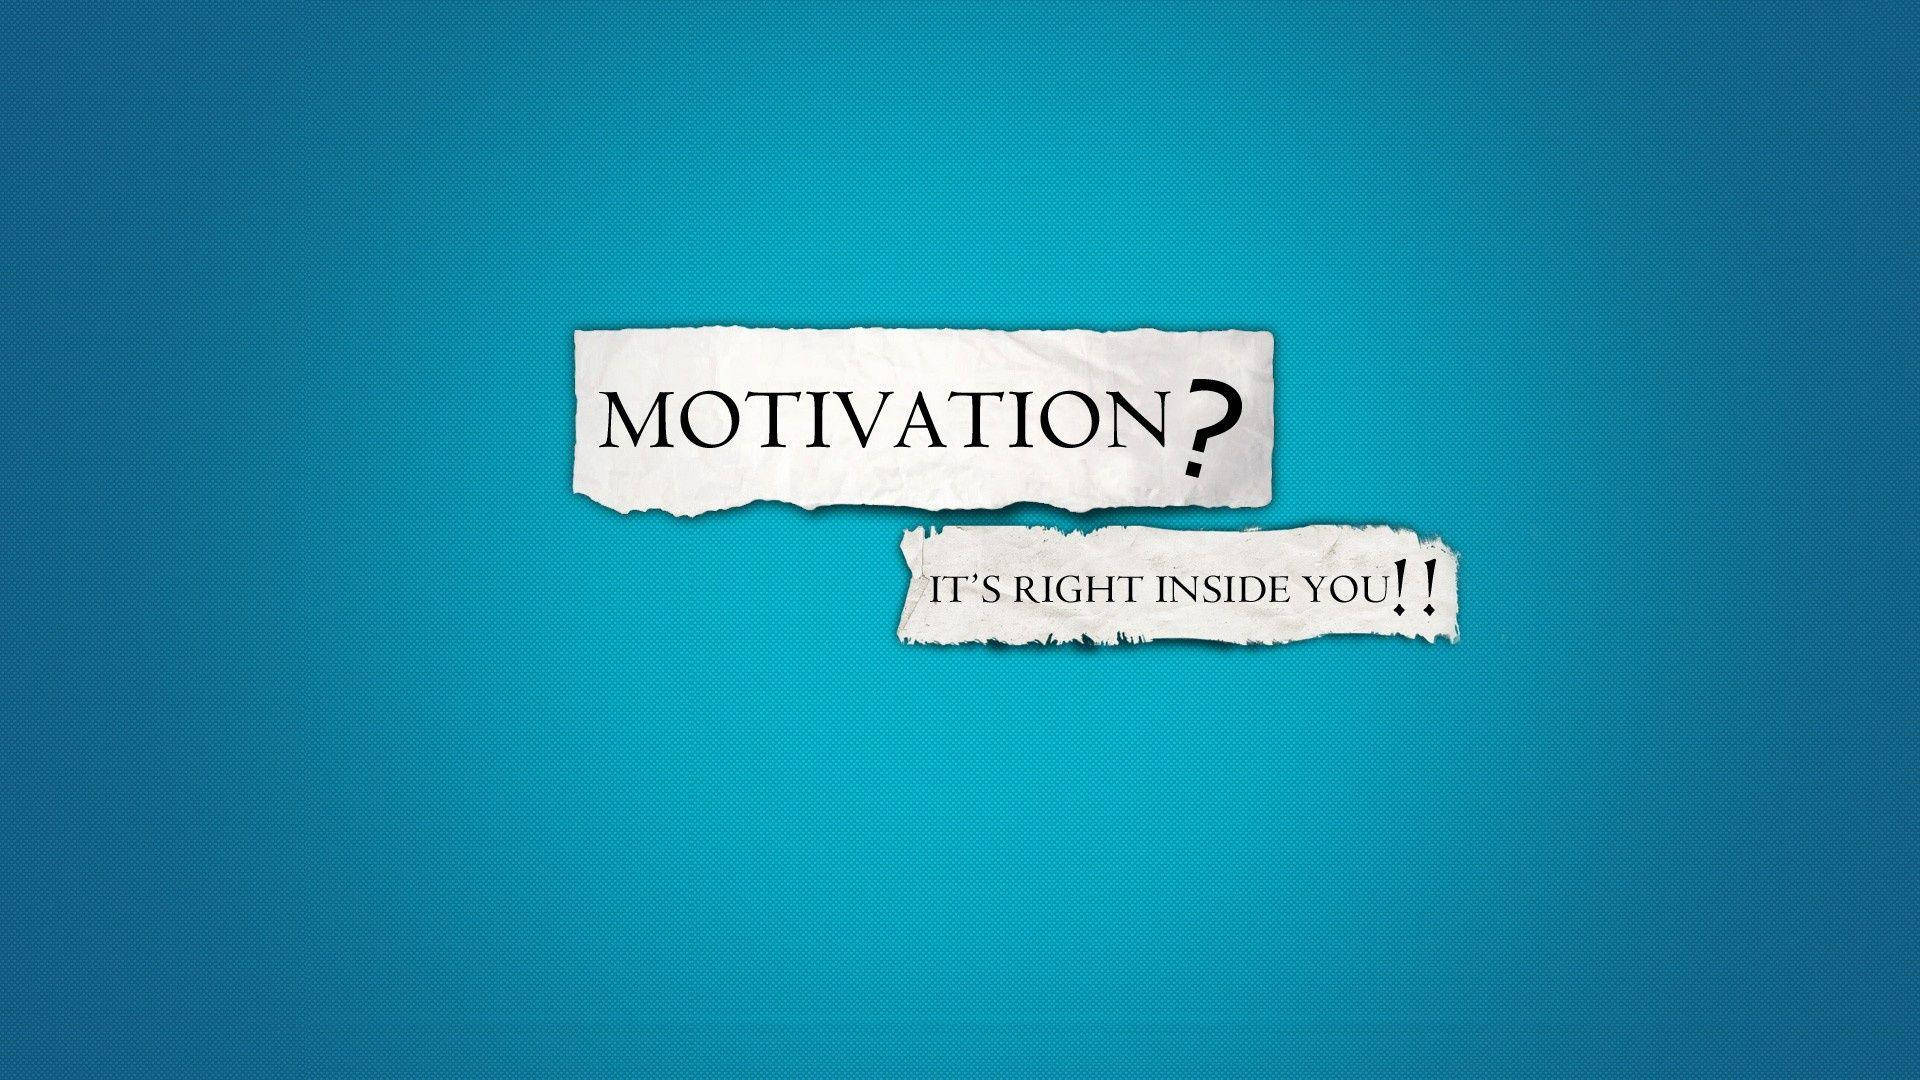 Motivational Hd Image In Blue Background Background